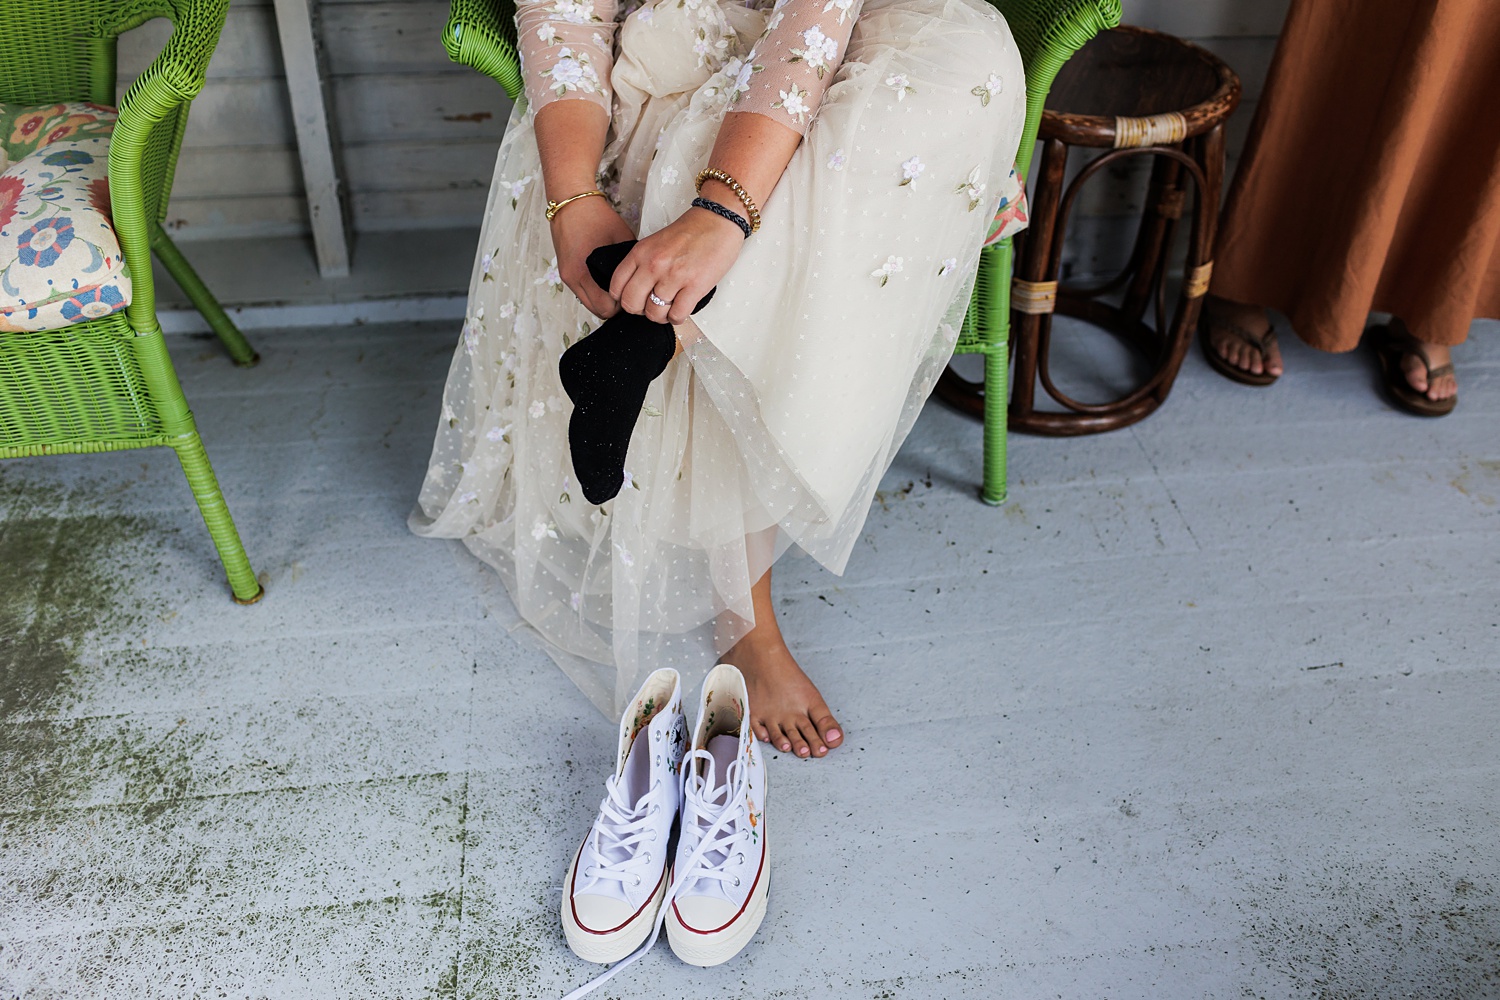 Bride puts on her customized Converse as her wedding day shoes